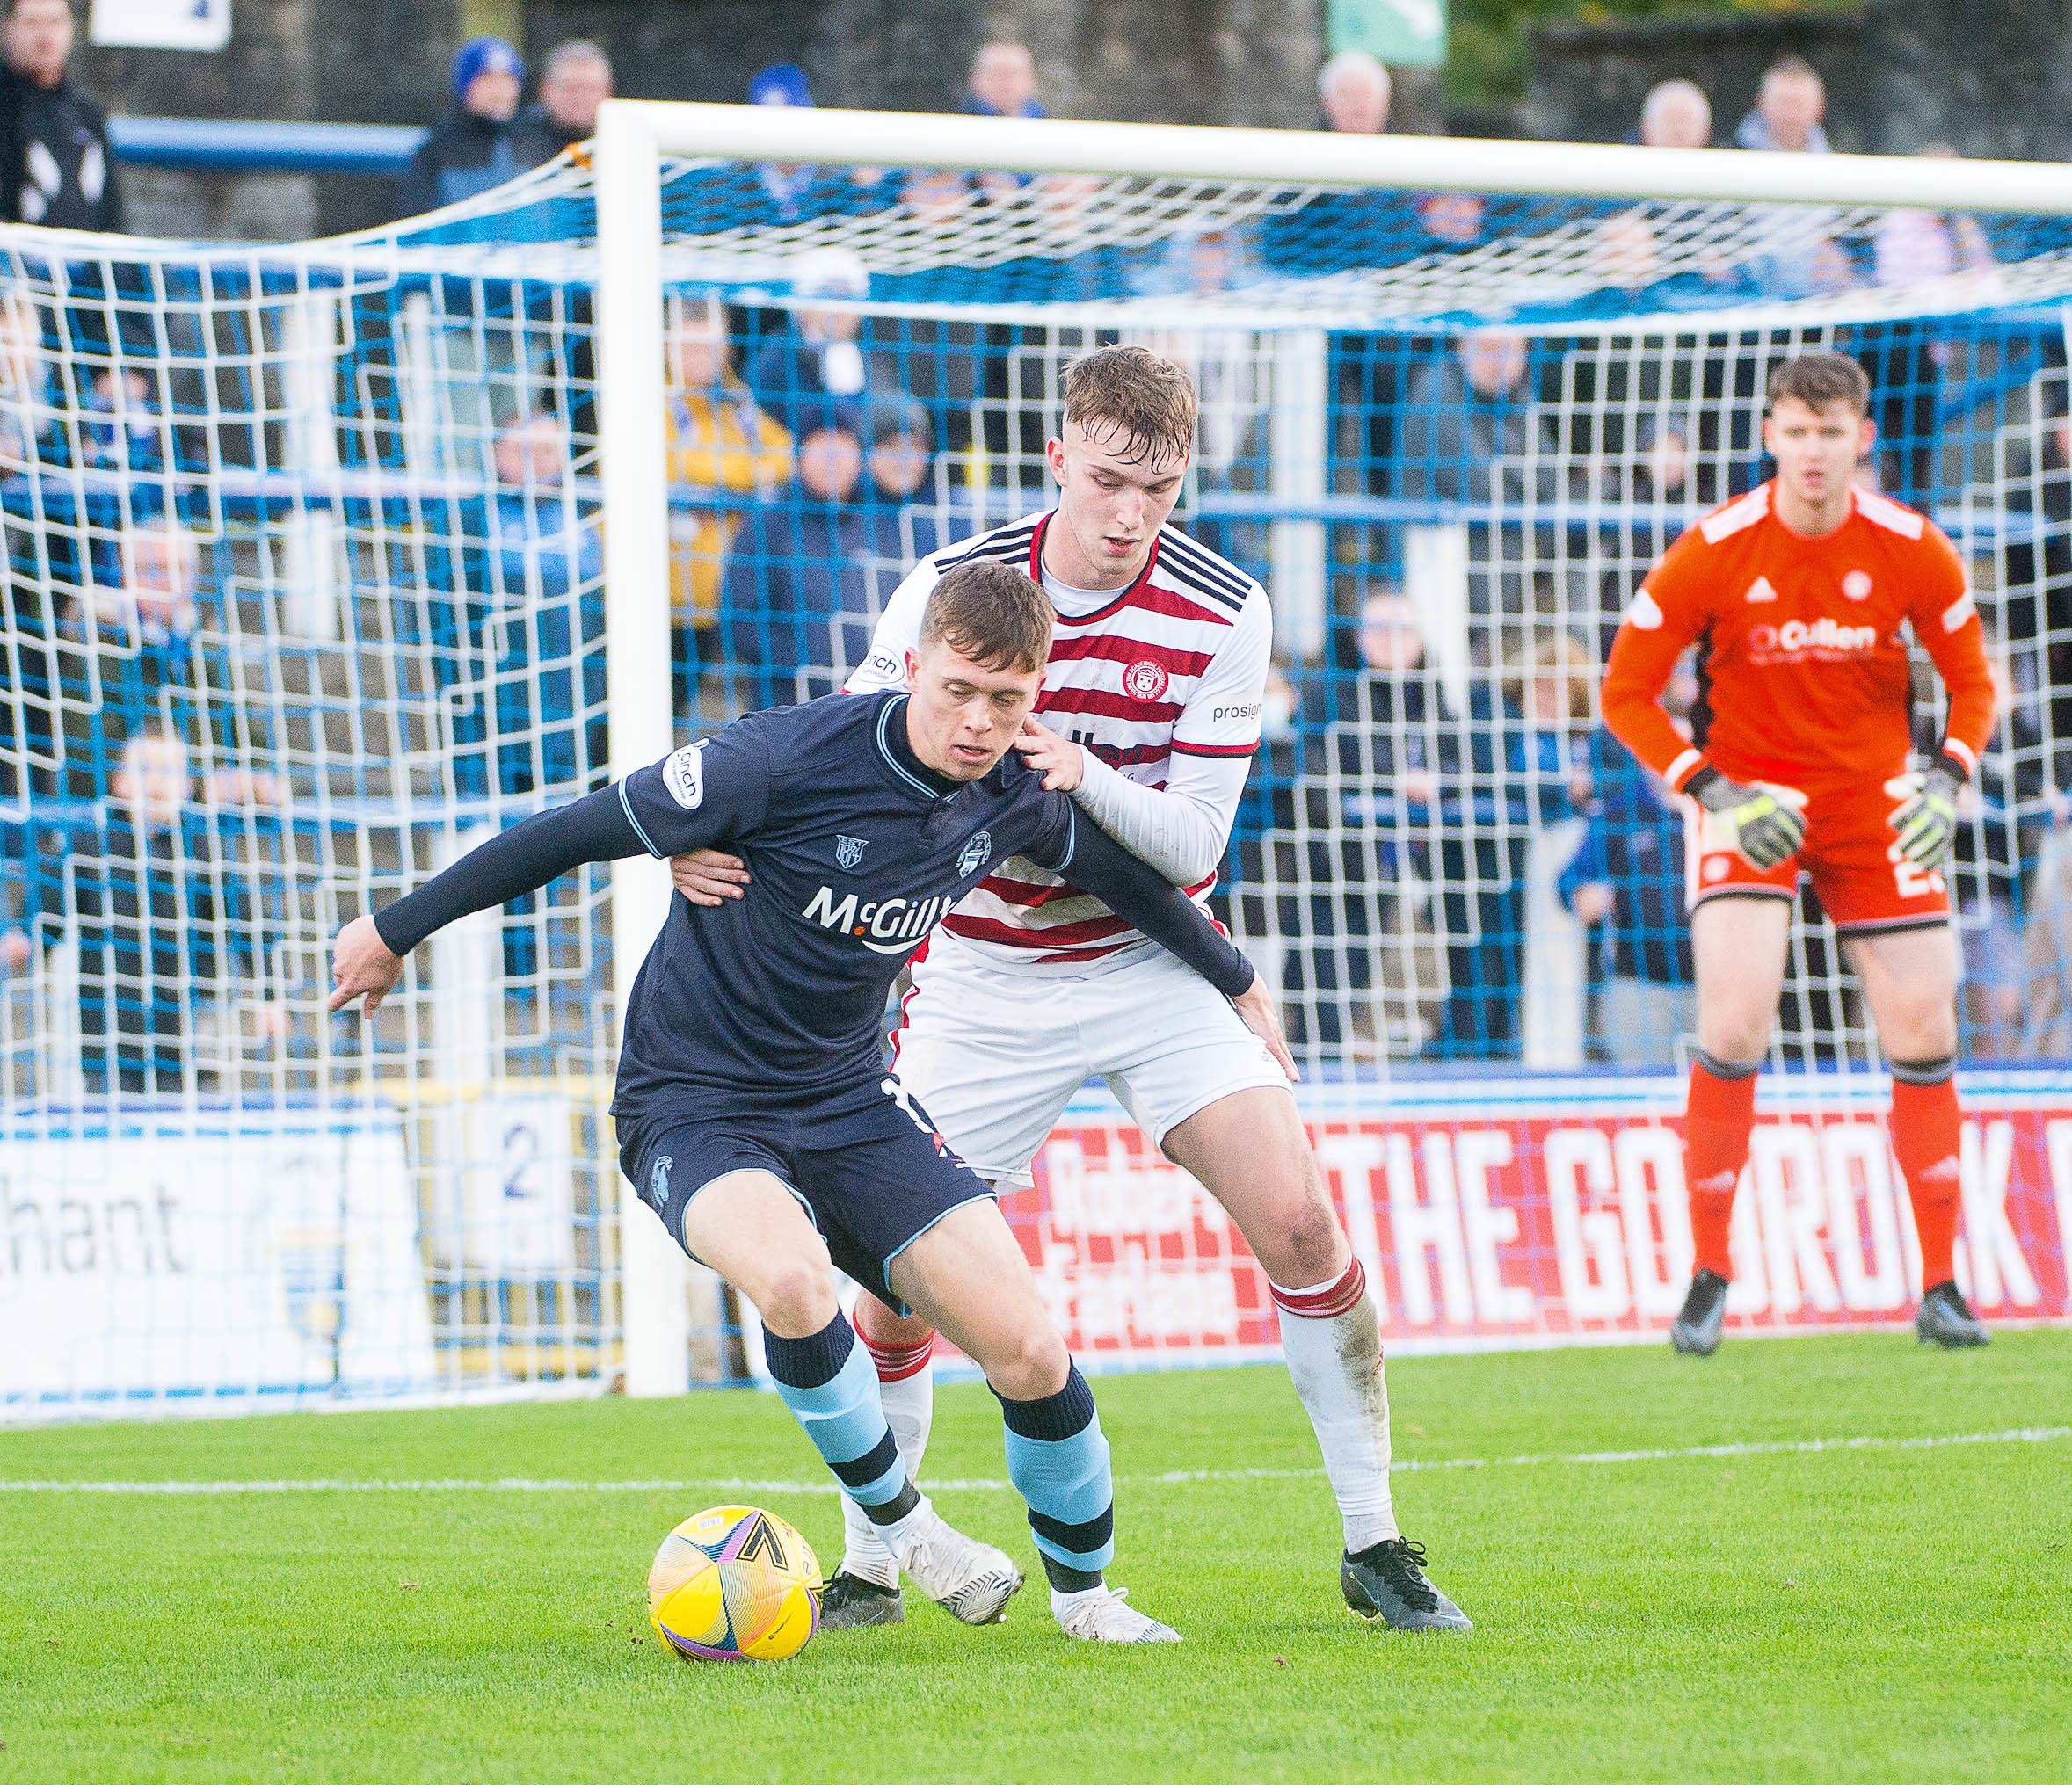 Terrace Talk: 'Late equaliser brought great relief for Morton fans'